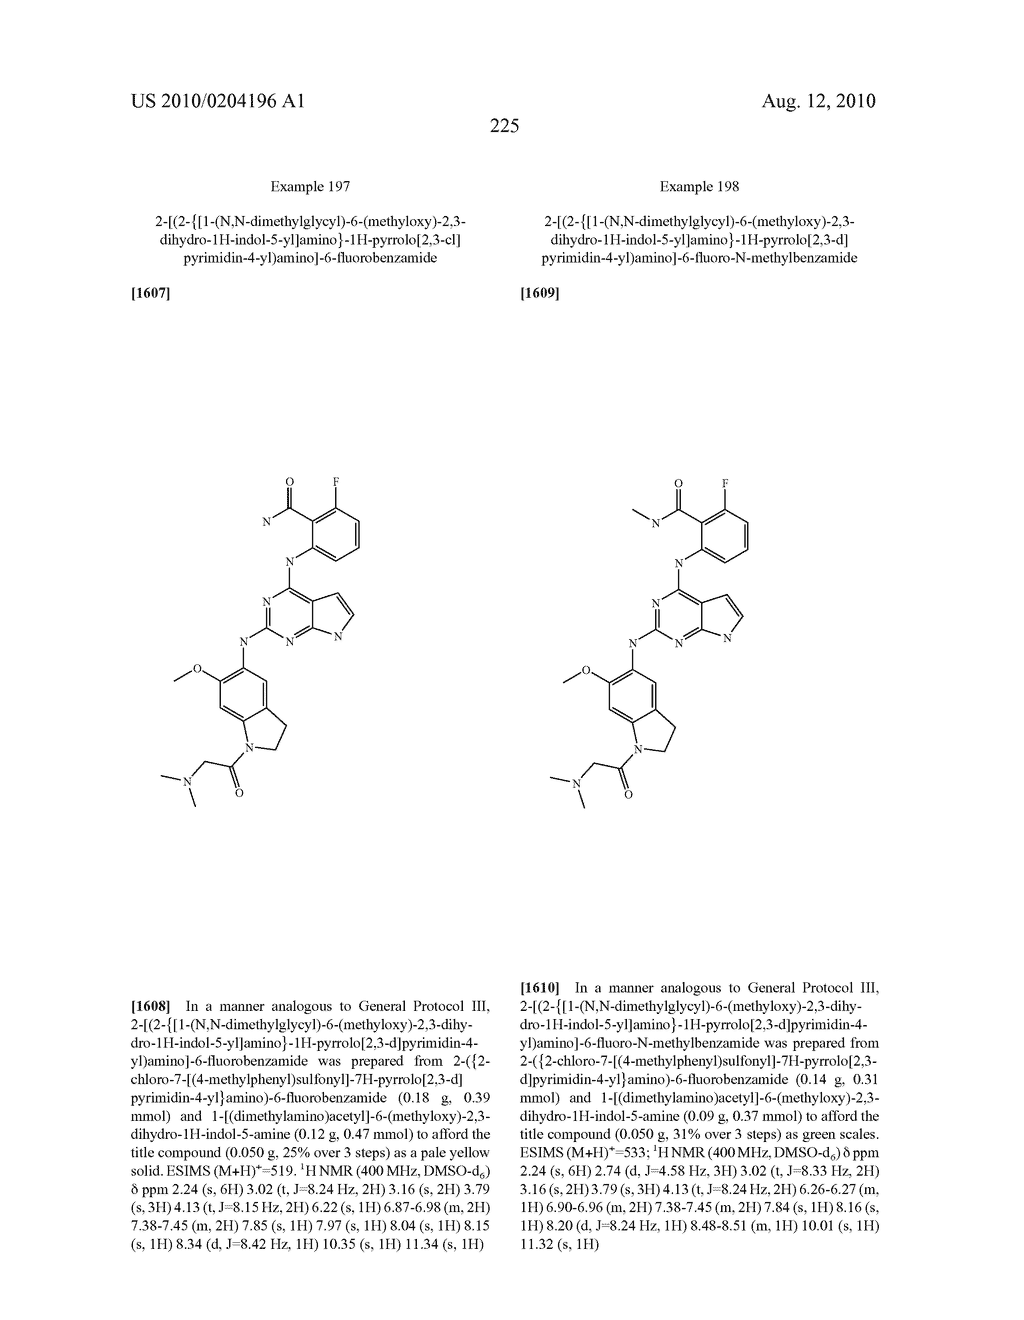 2-[2--1H-Pyrrolo[2,3-D]Pyrimidin-4-YL)Amino] Benzamide Derivatives As IGF-1R Inhibitors For The Treatment Of Cancer - diagram, schematic, and image 227